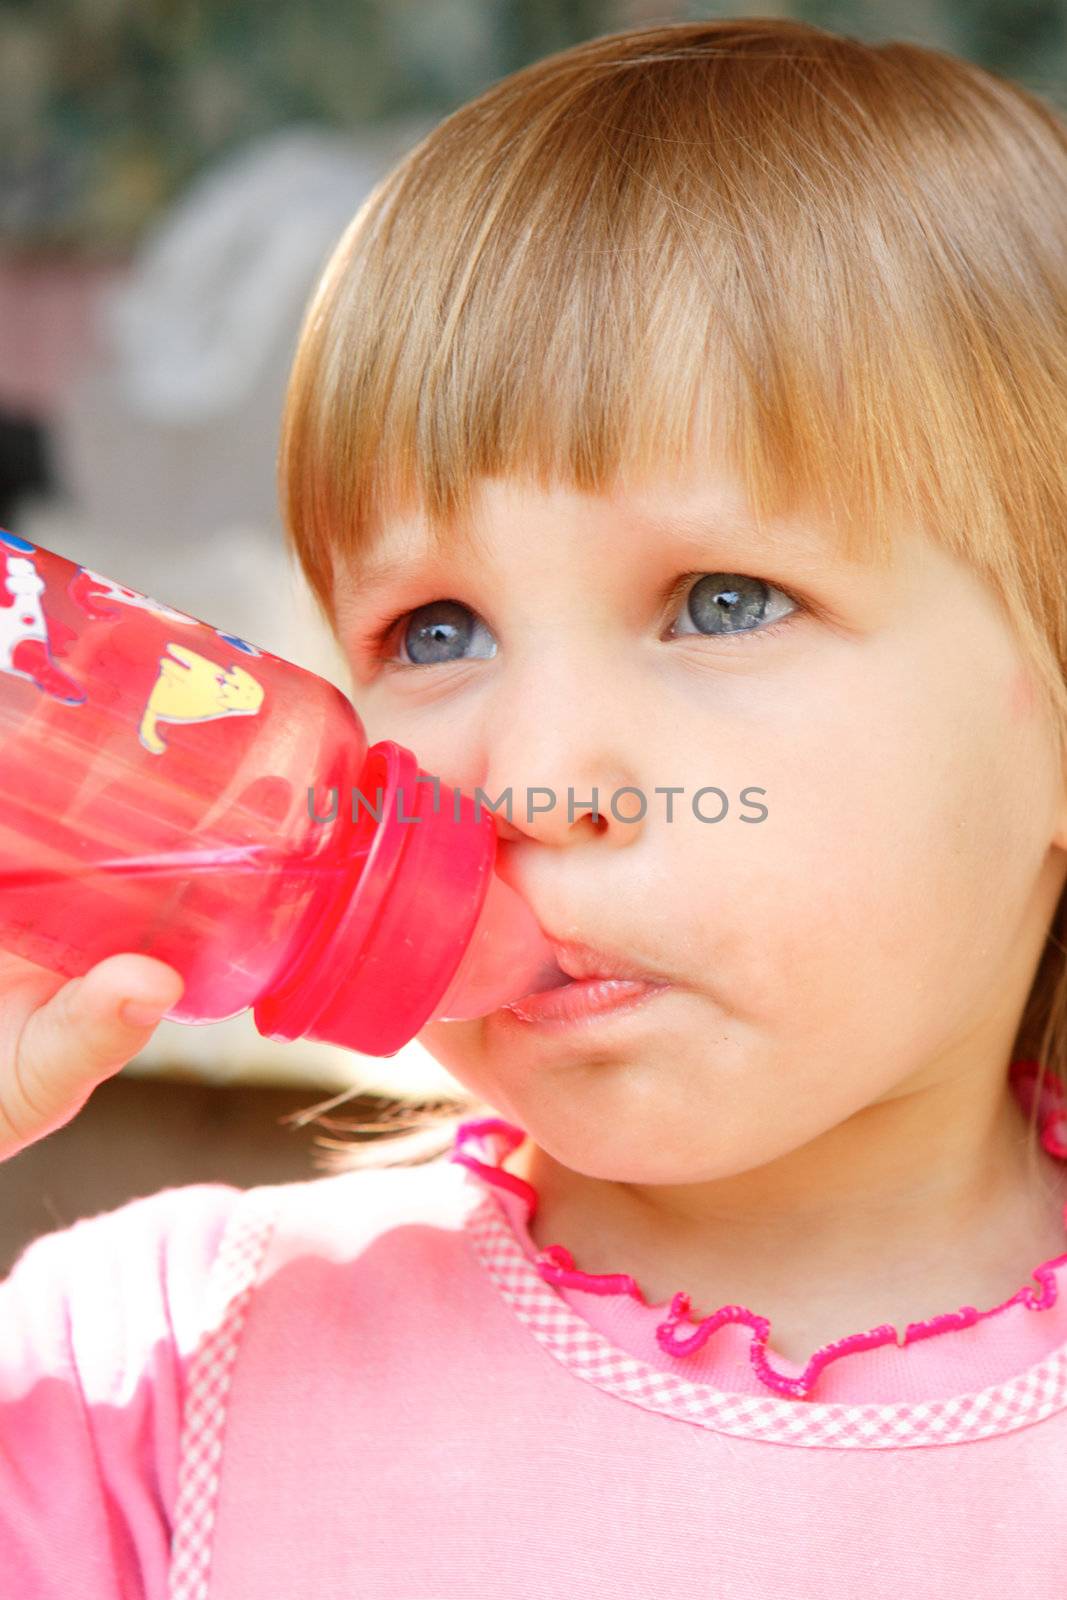 The girl drinks water from a bottle